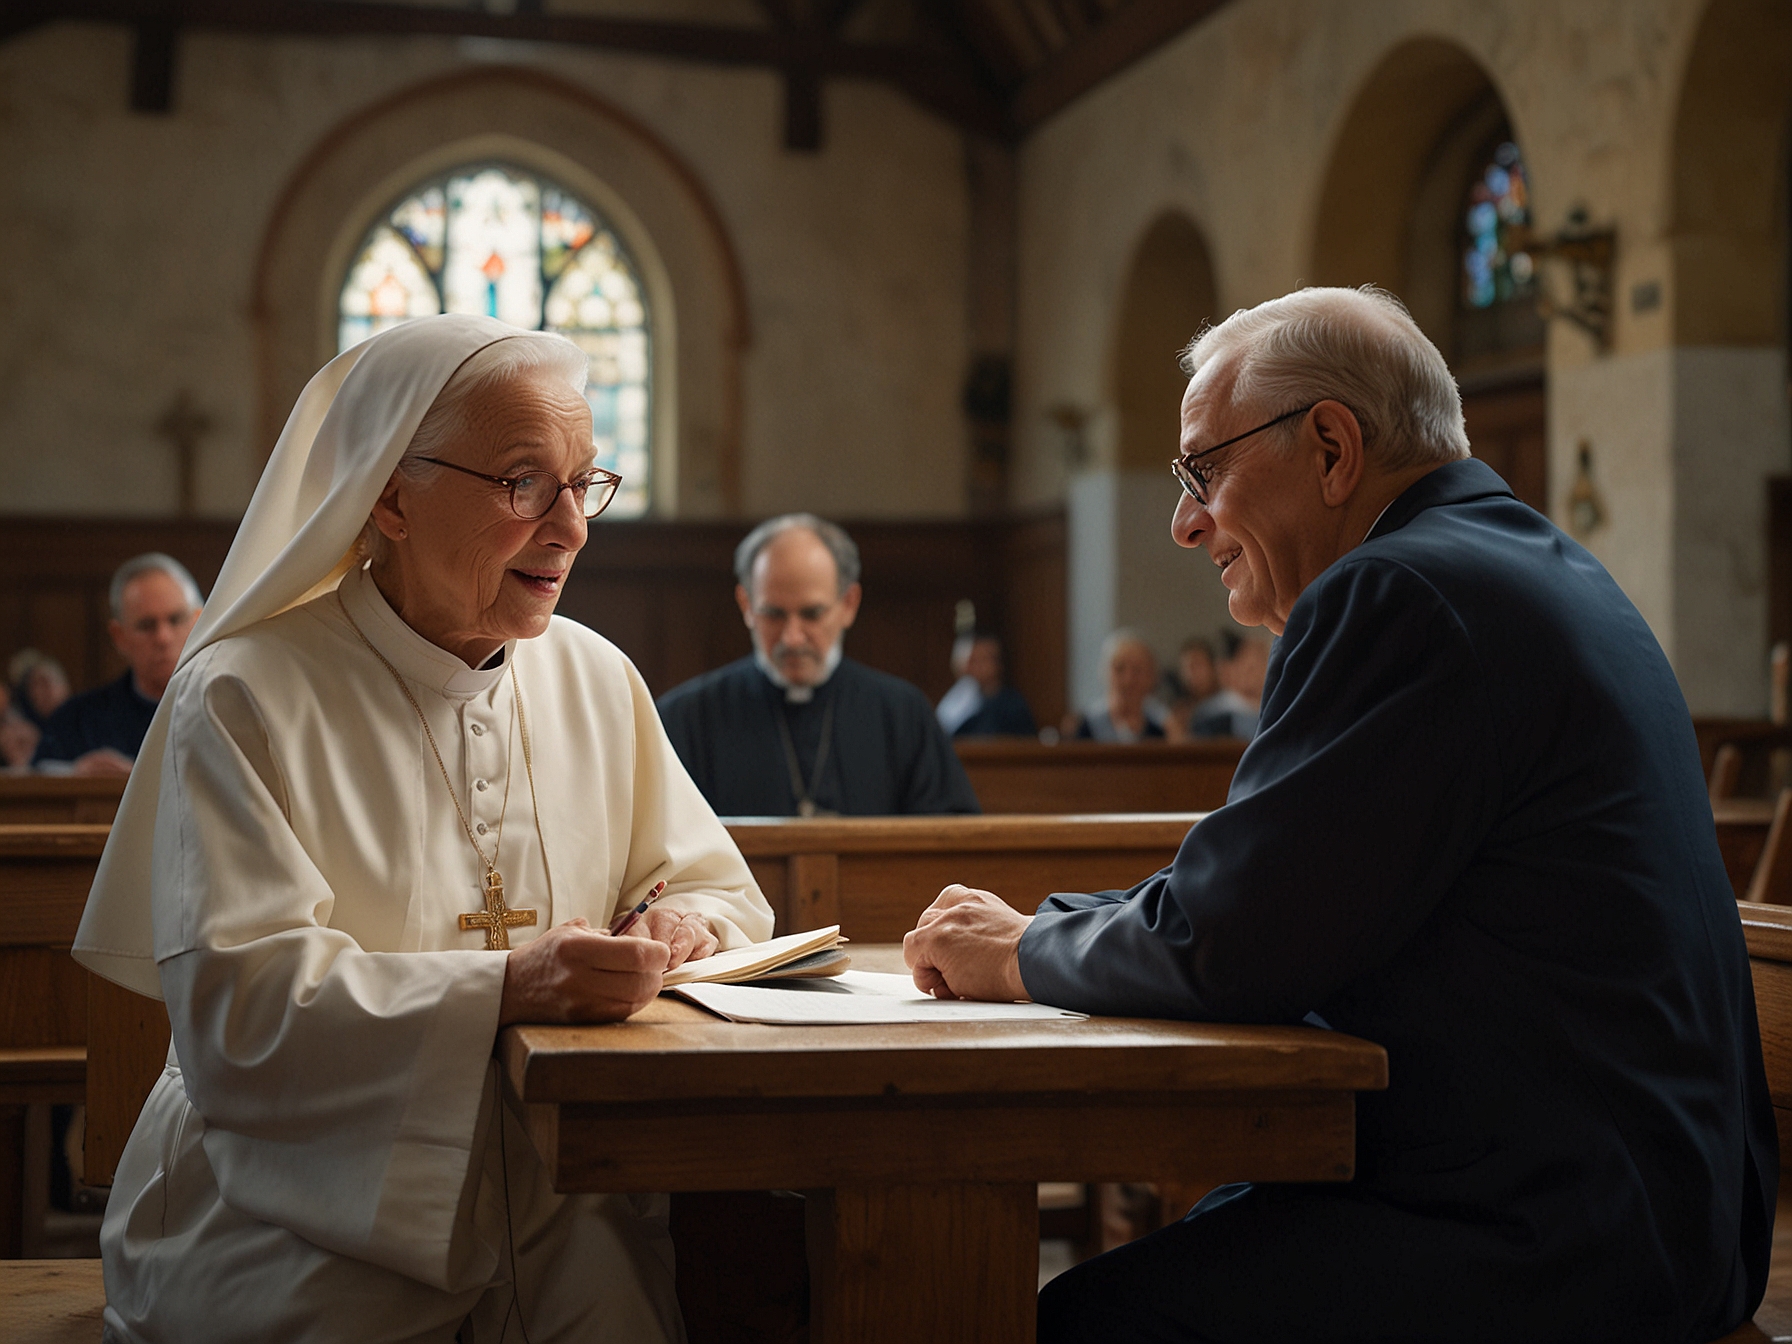 Rita candidly speaking to the local priest in the village church, conveying both comedic and heartfelt elements, capturing the film’s blend of humor, faith, and philosophical inquiry.